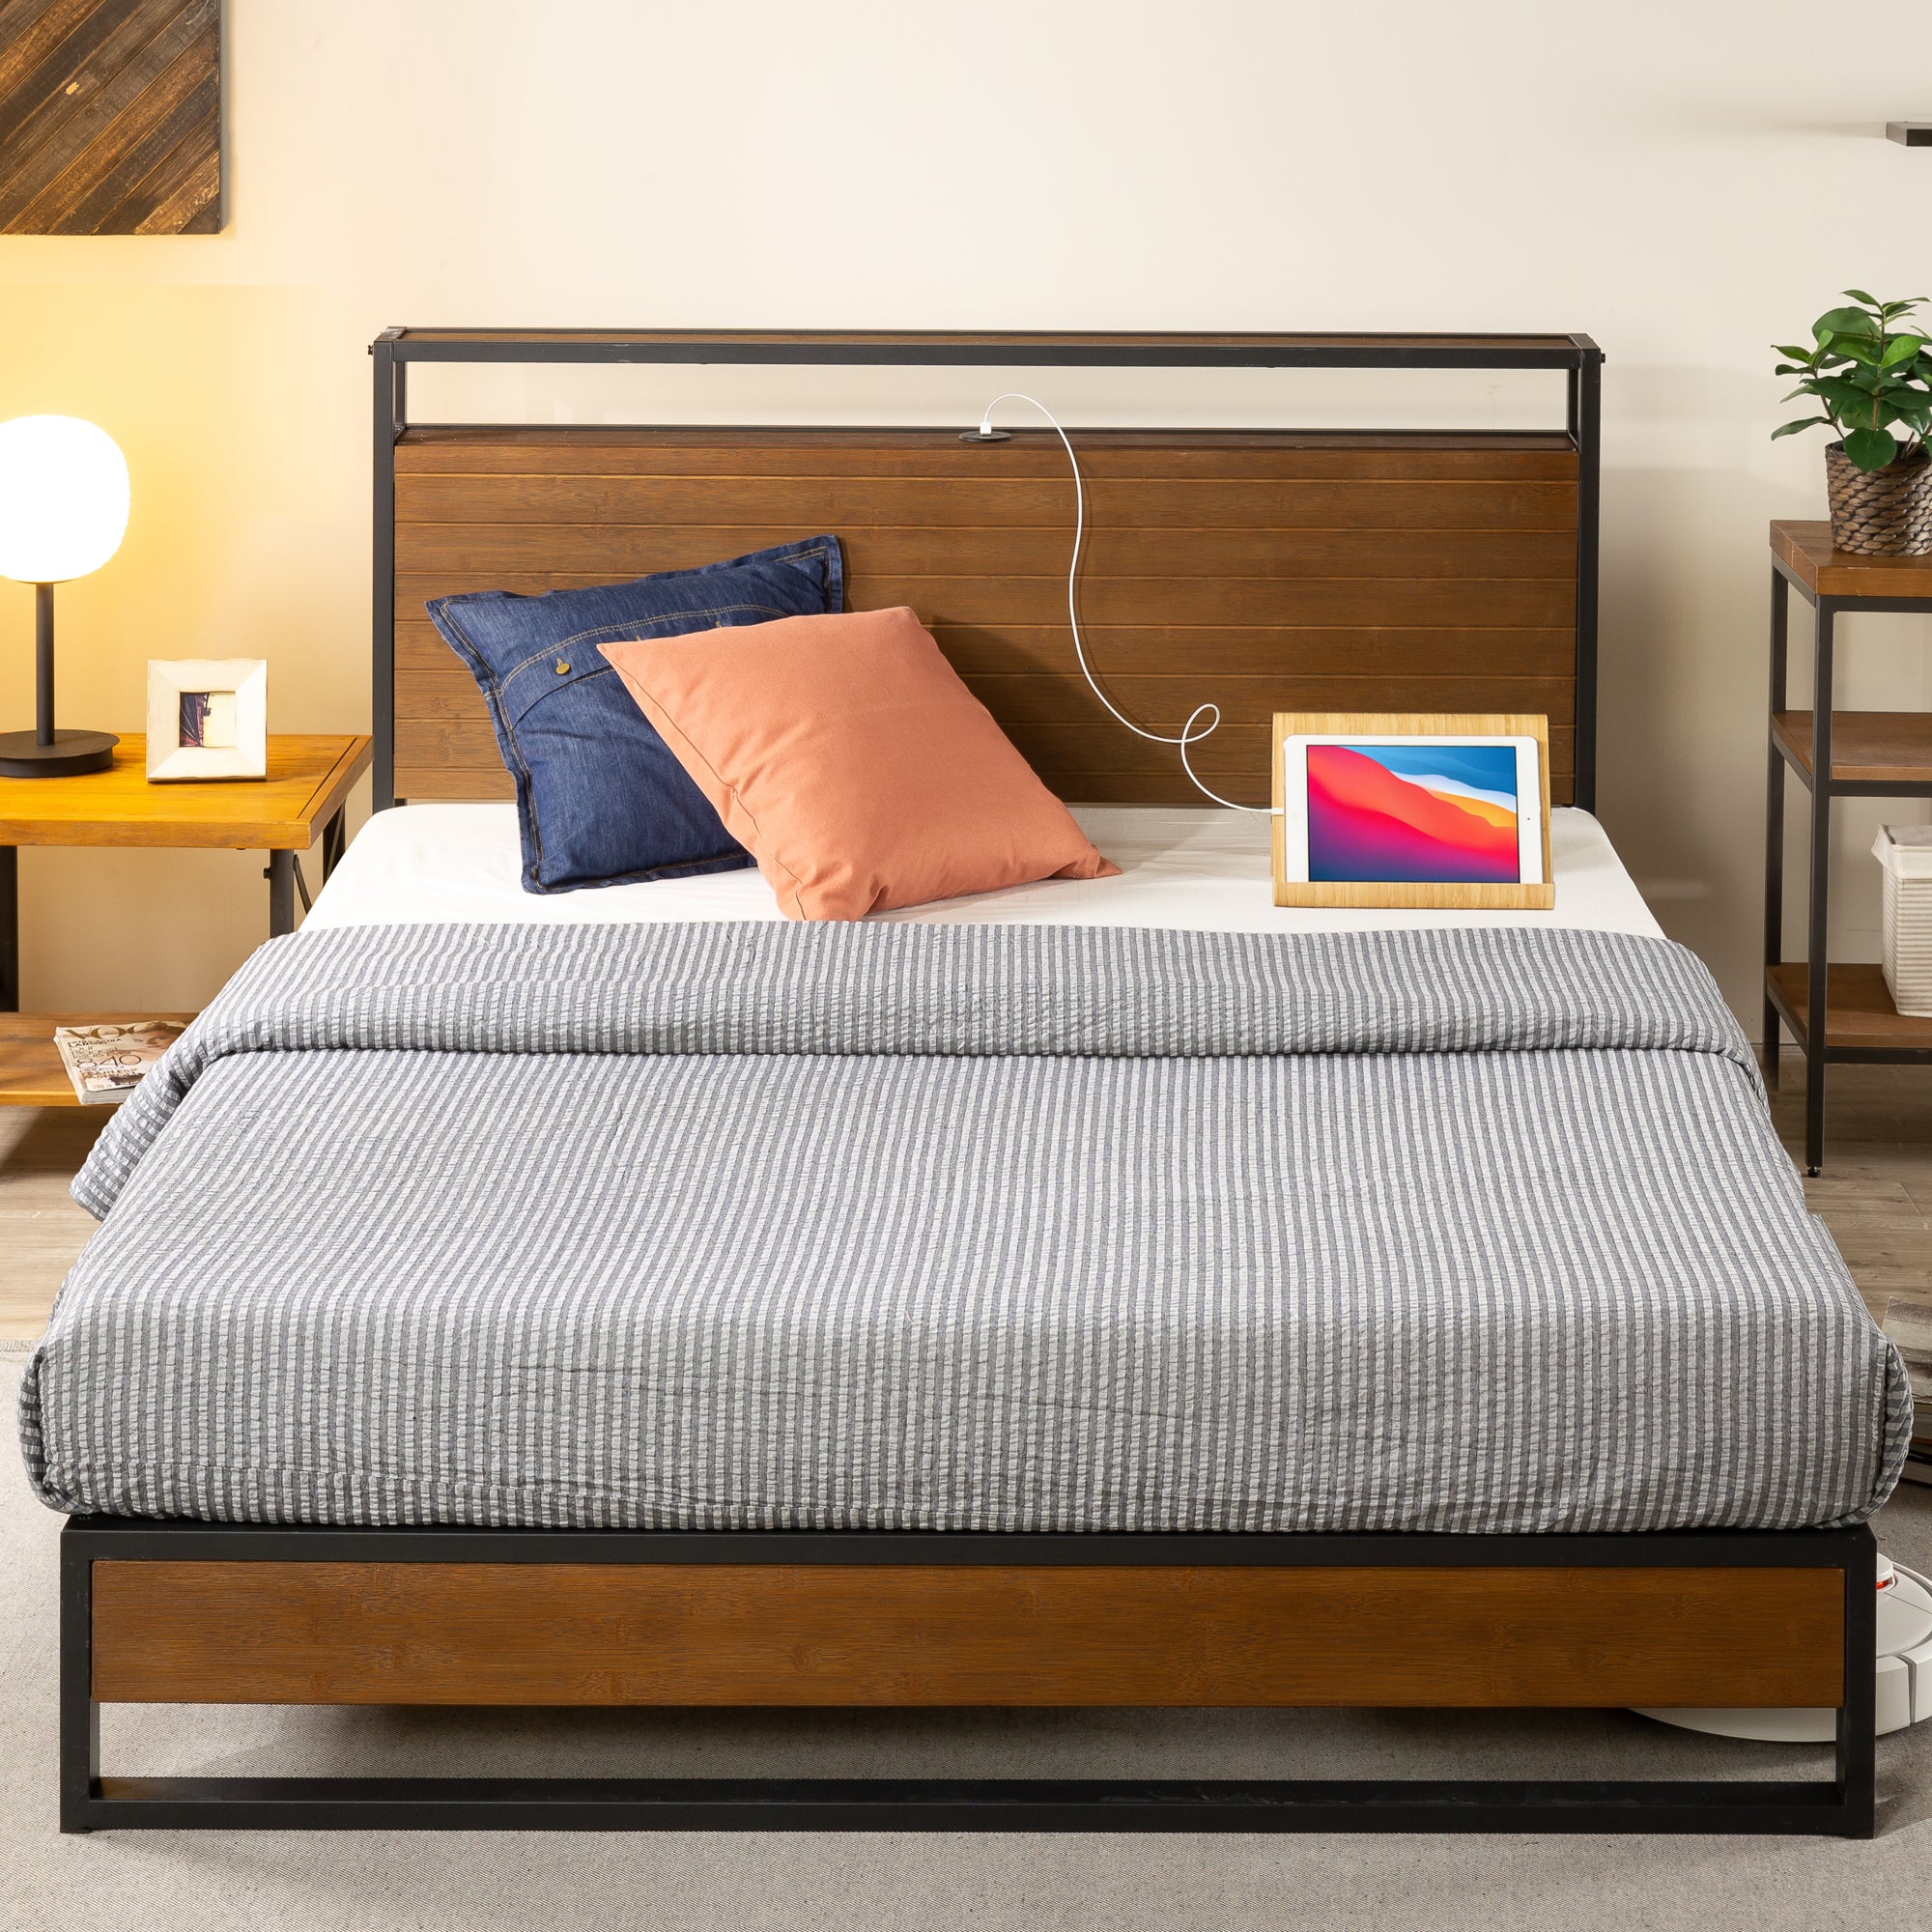 Zinus Ironline Metal and Solid Wood Bed Frame Base with Headboard Shelf and USB Port